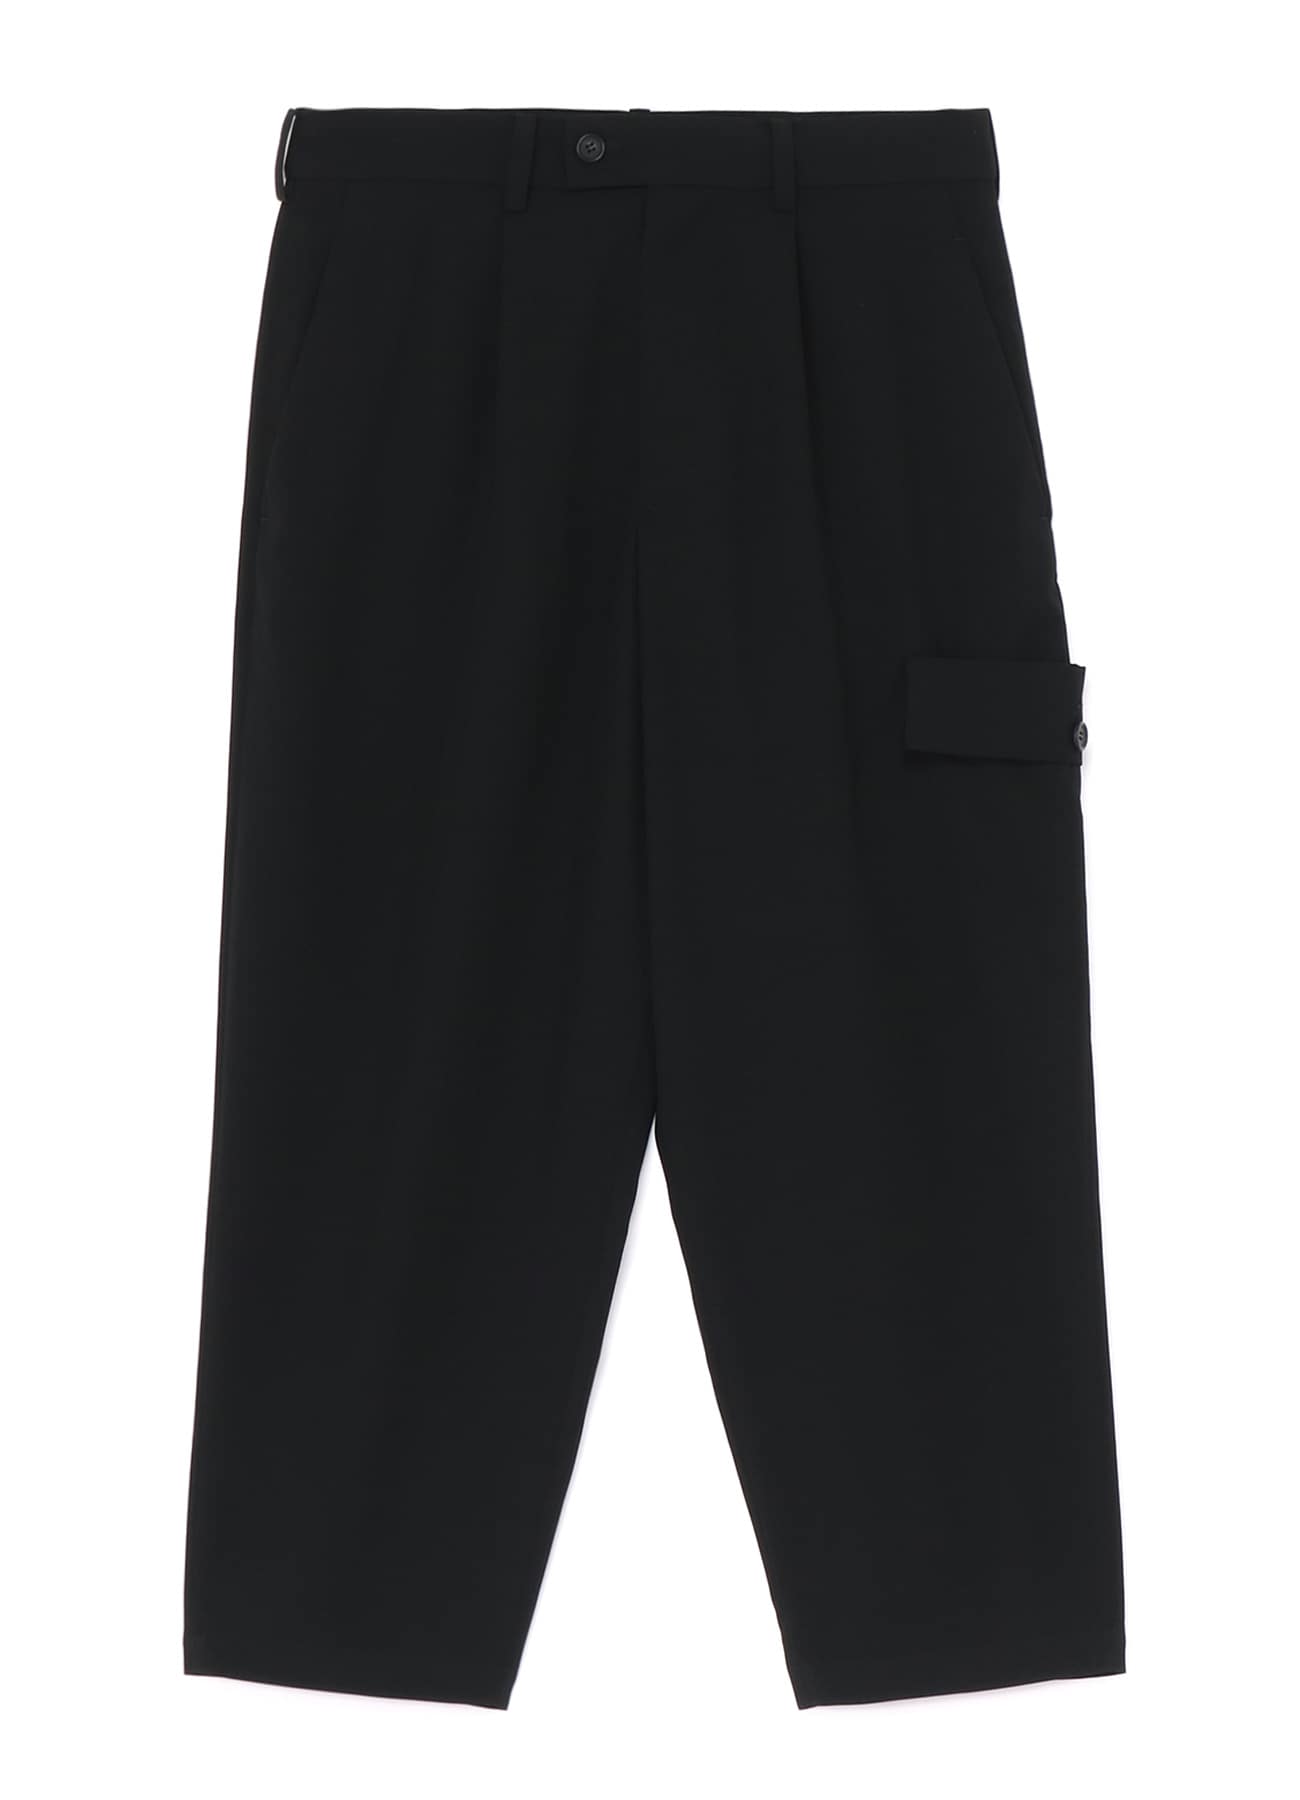 POLYESTER GABARDINE PANTS WITH KNEE FLAP POCKETS